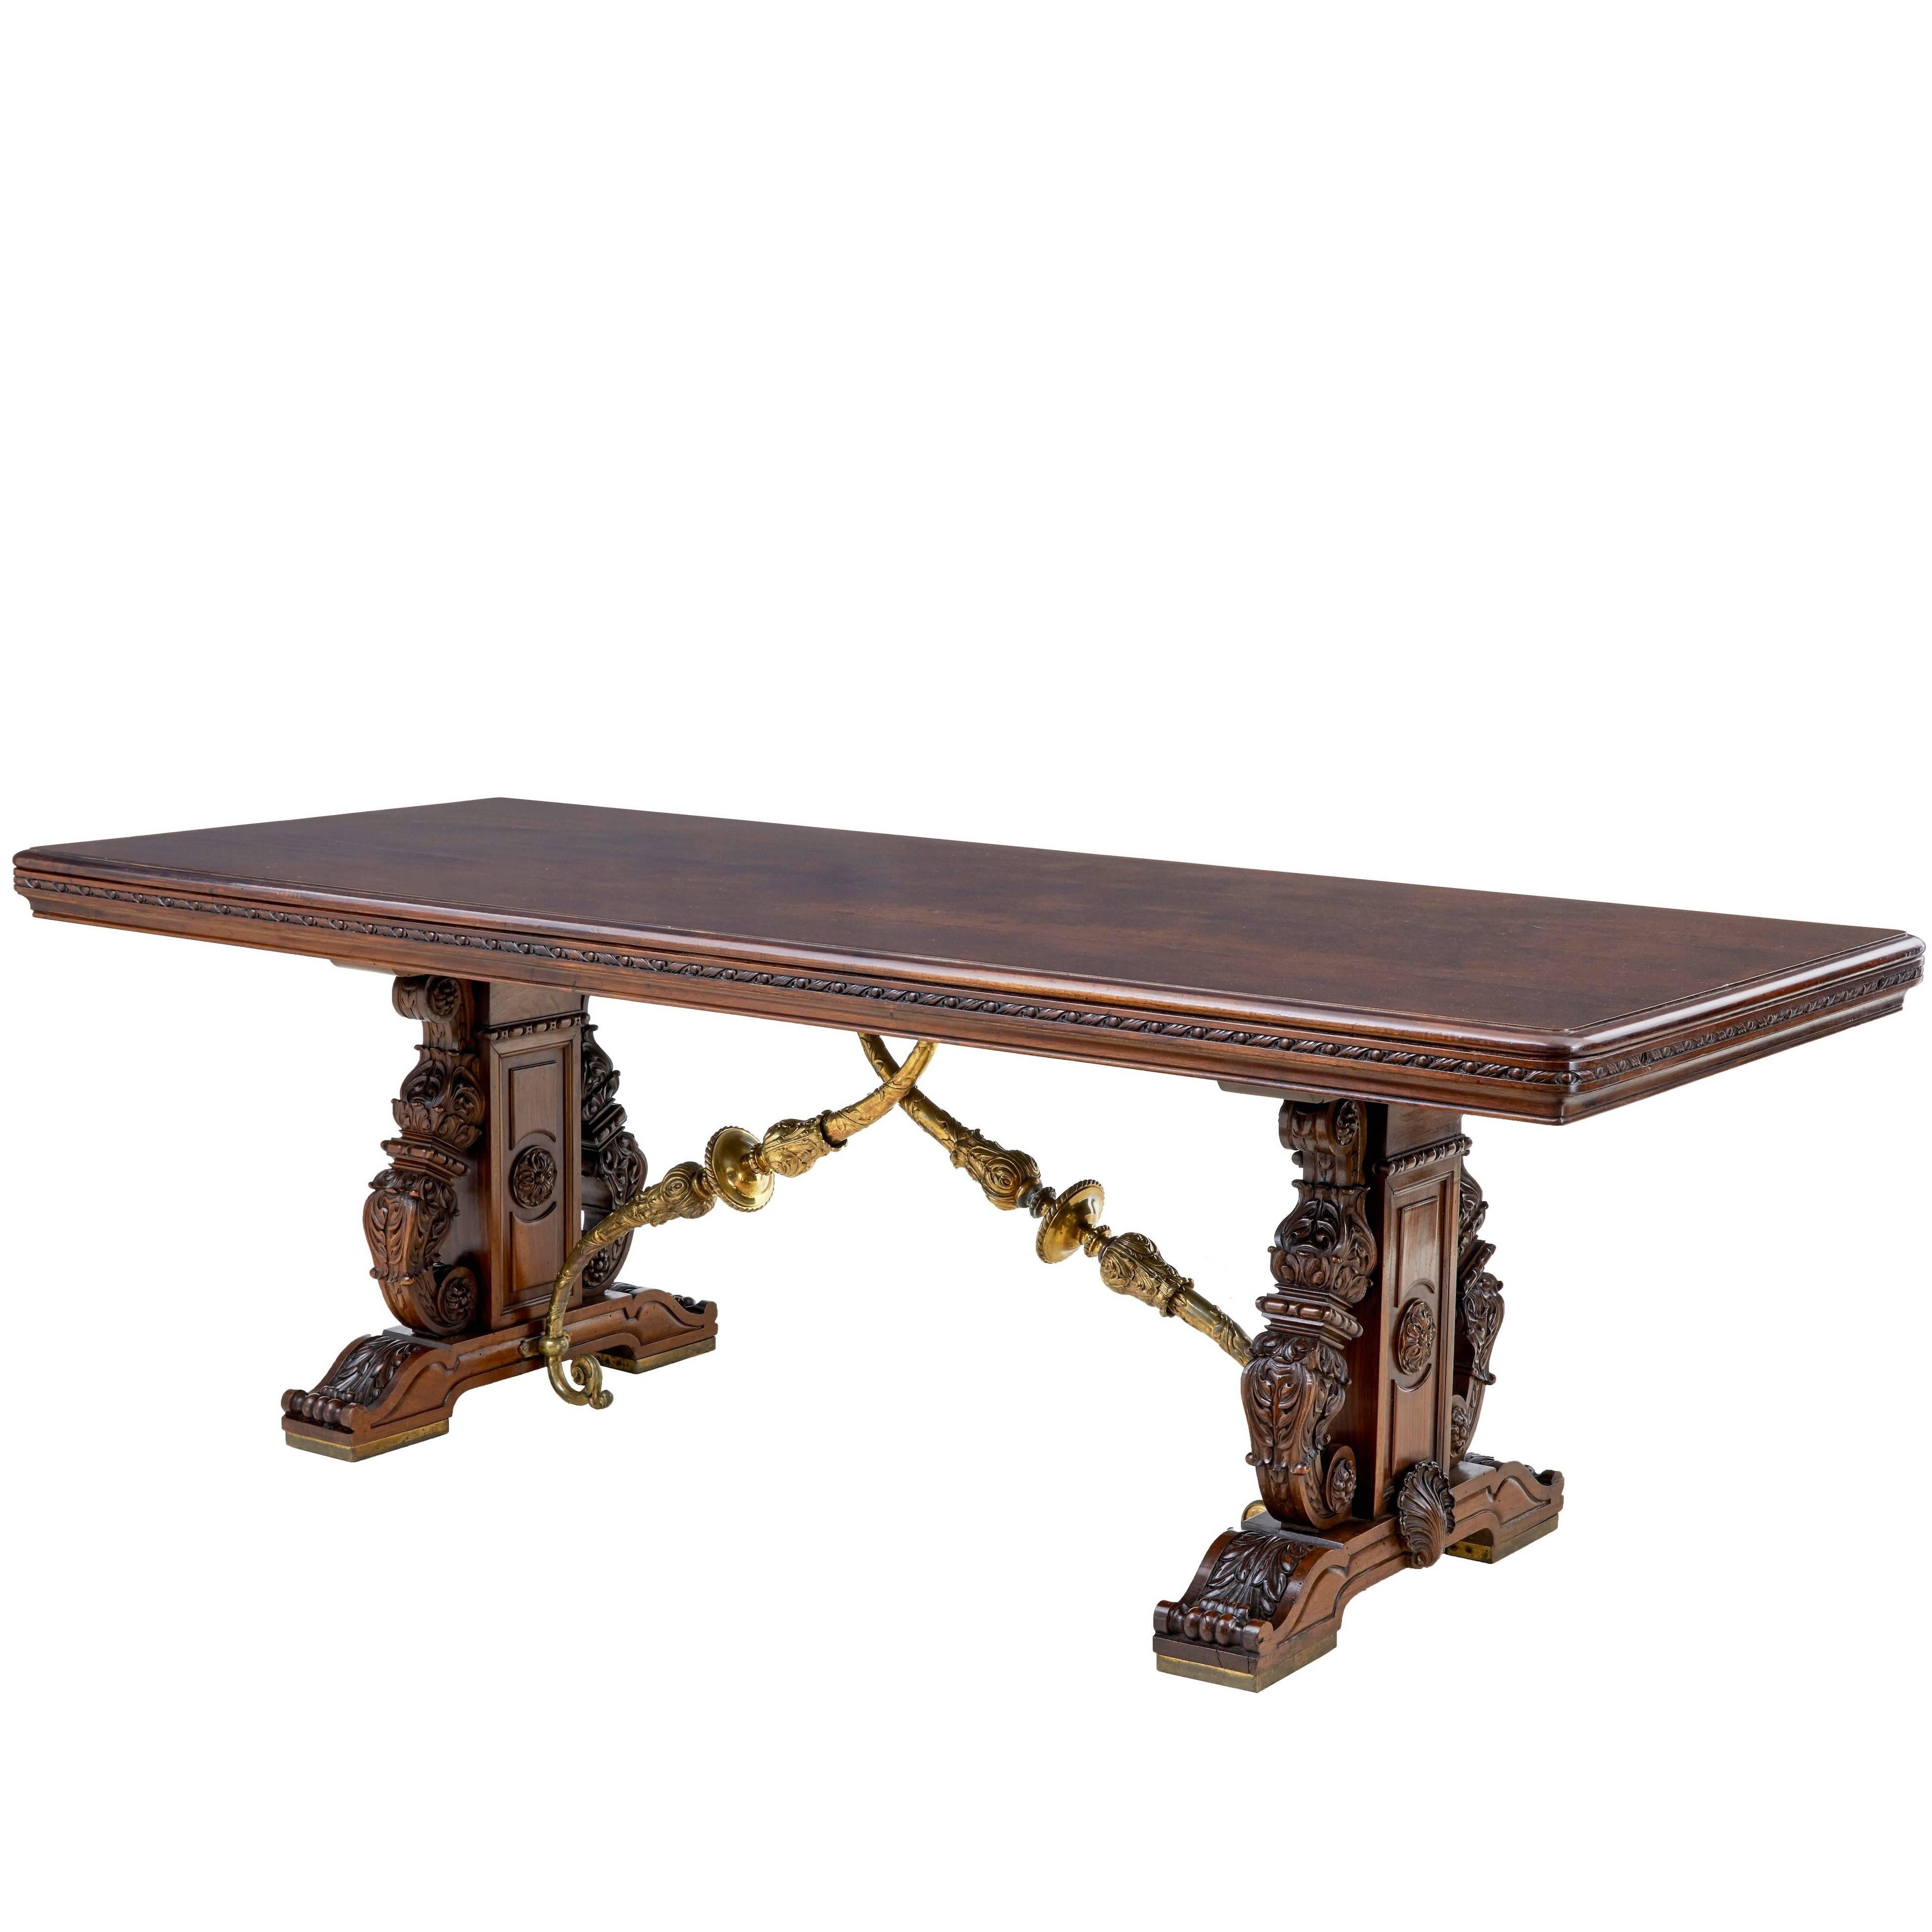 Impressive 19th Century French Carved Walnut and Bronze Dining Table